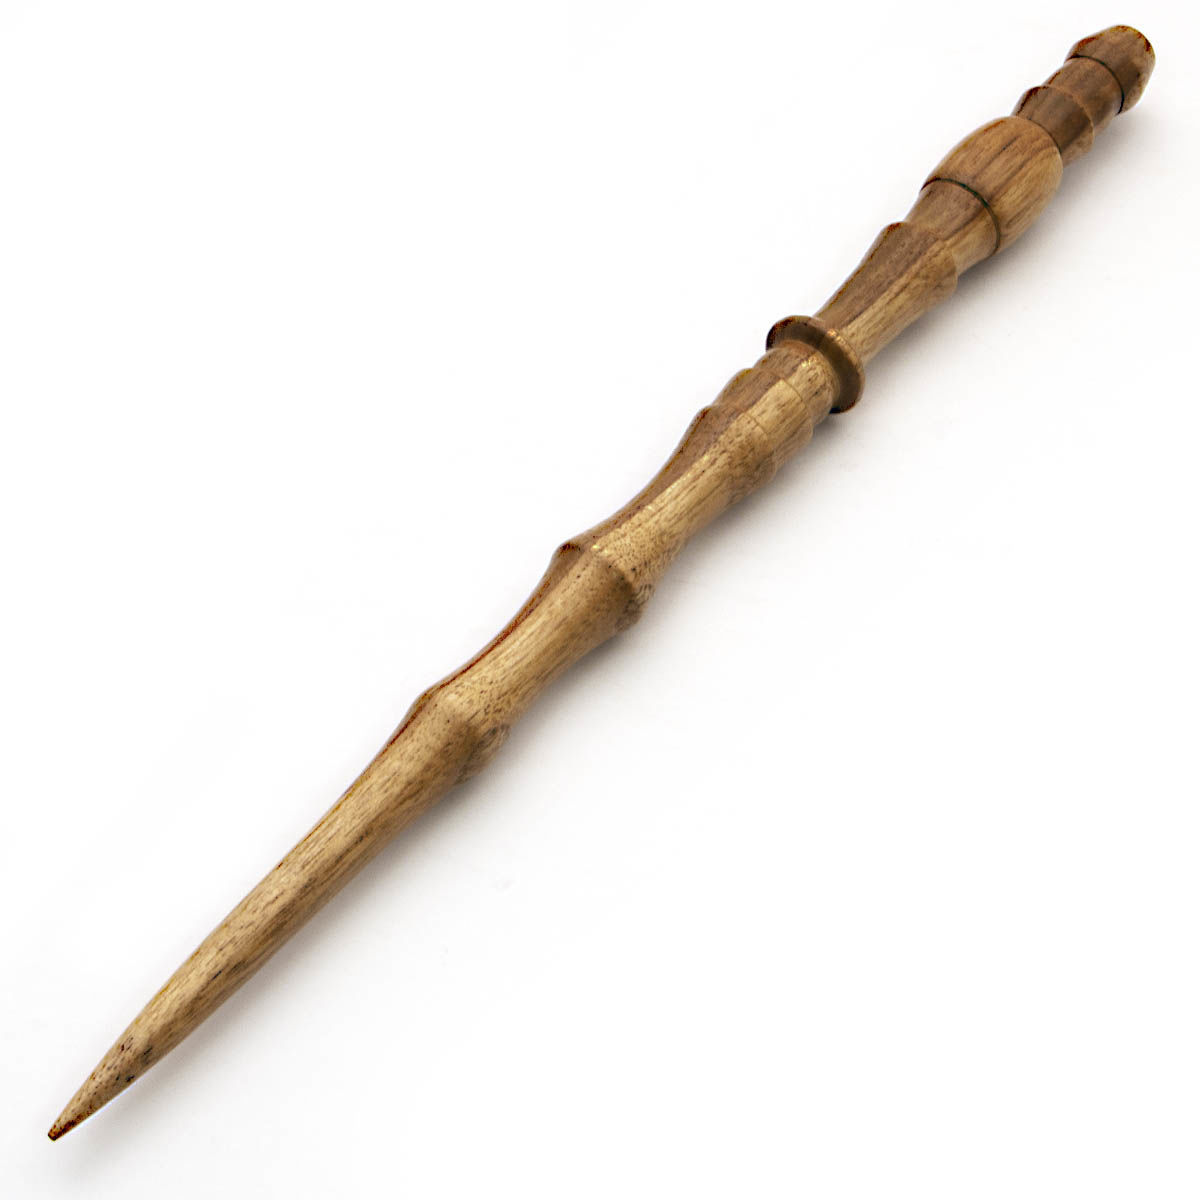 Wizard's Magic Wand - Stained Wood